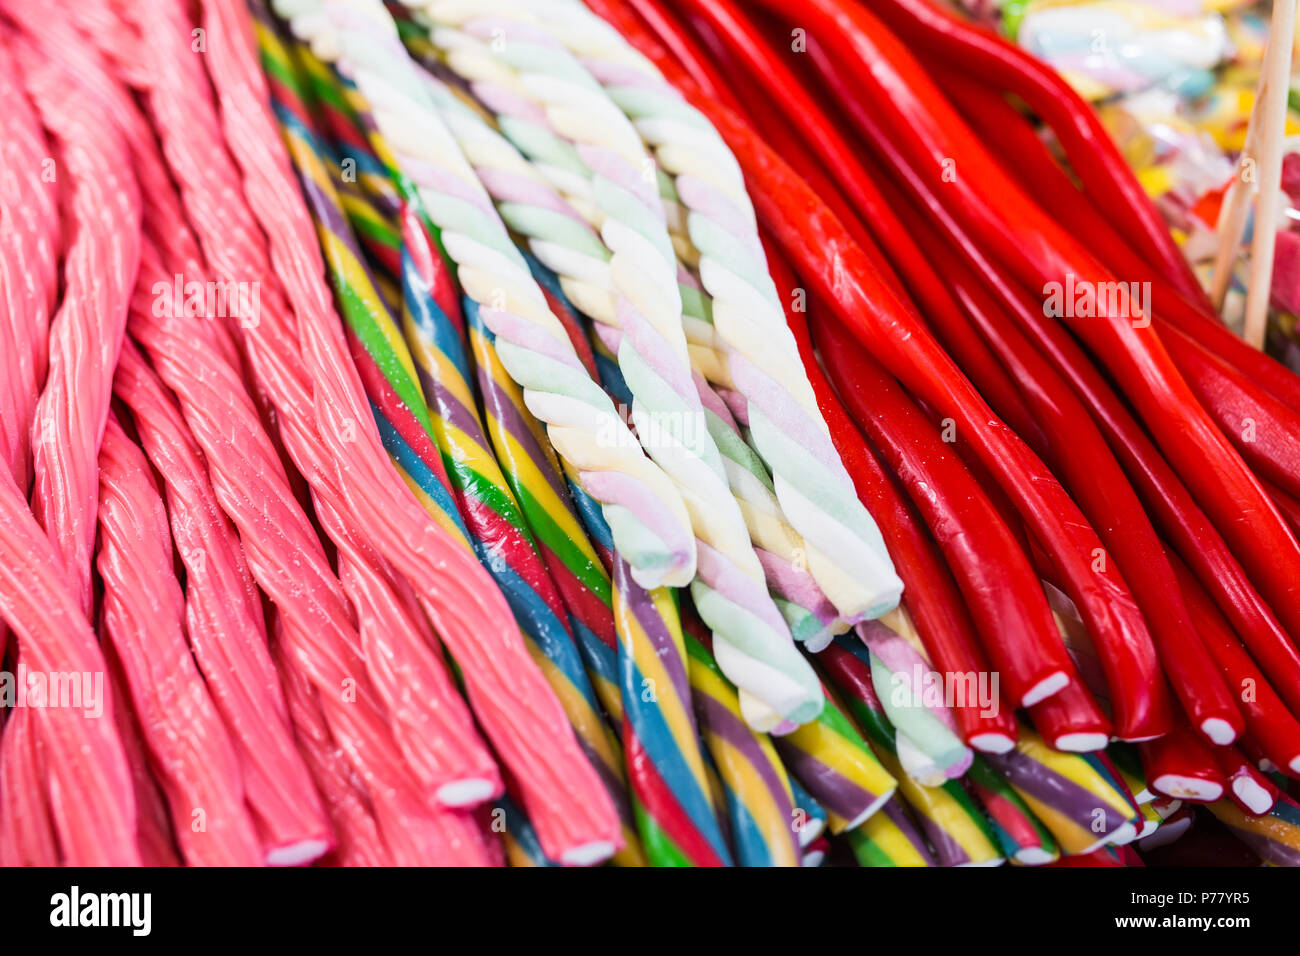 Wonderful candy sticks in any color and appearance Stock Photo